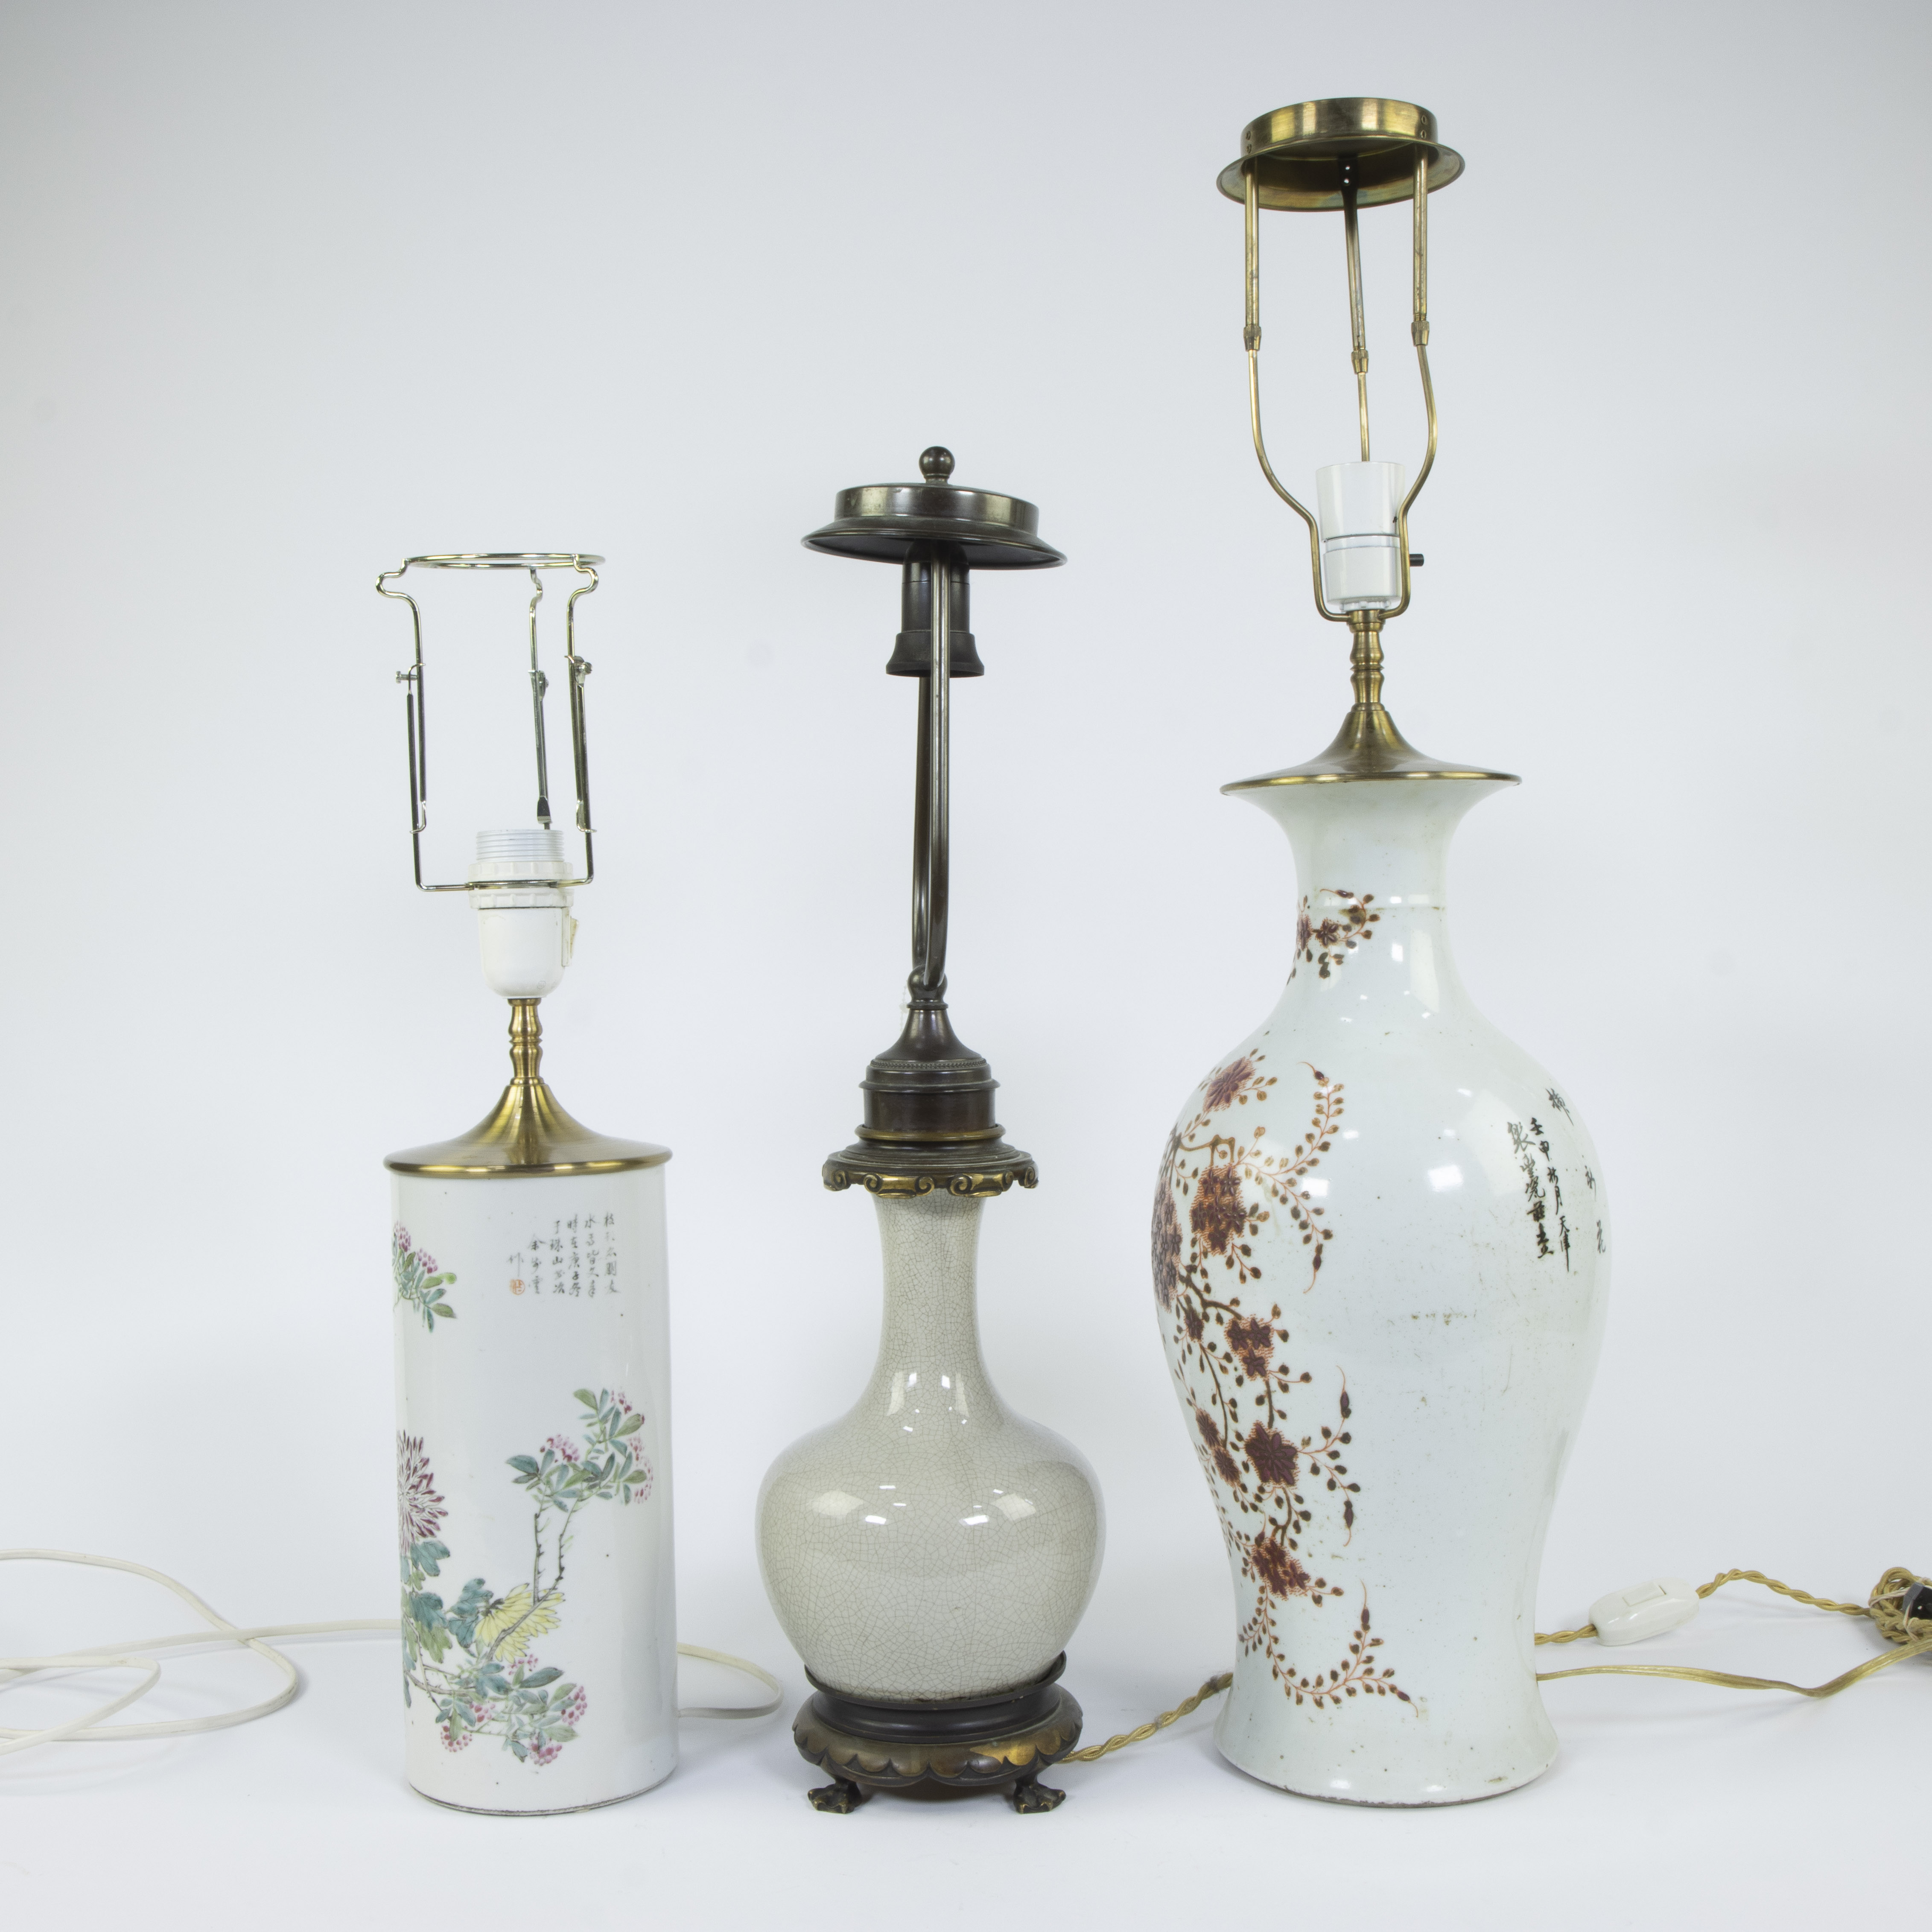 Collection of 3 Chinese vases transformed into lampadaires - Image 2 of 5